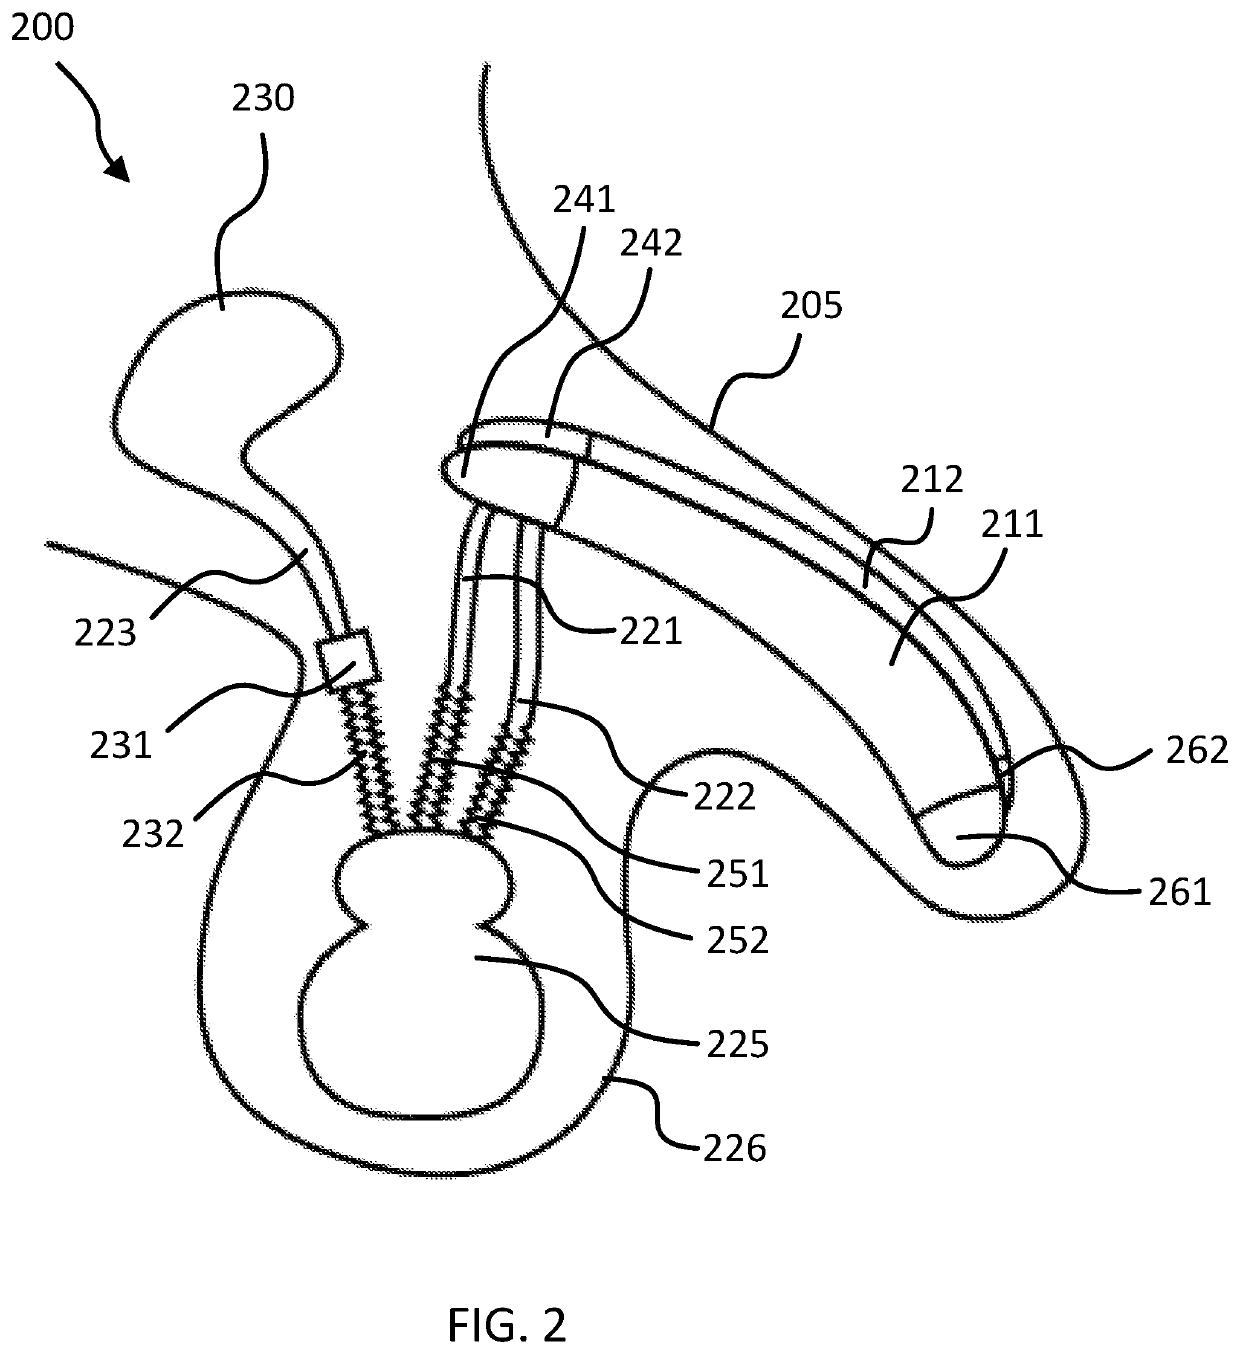 Penile prosthesis comprising a reservoir attachable to a pump by connectors